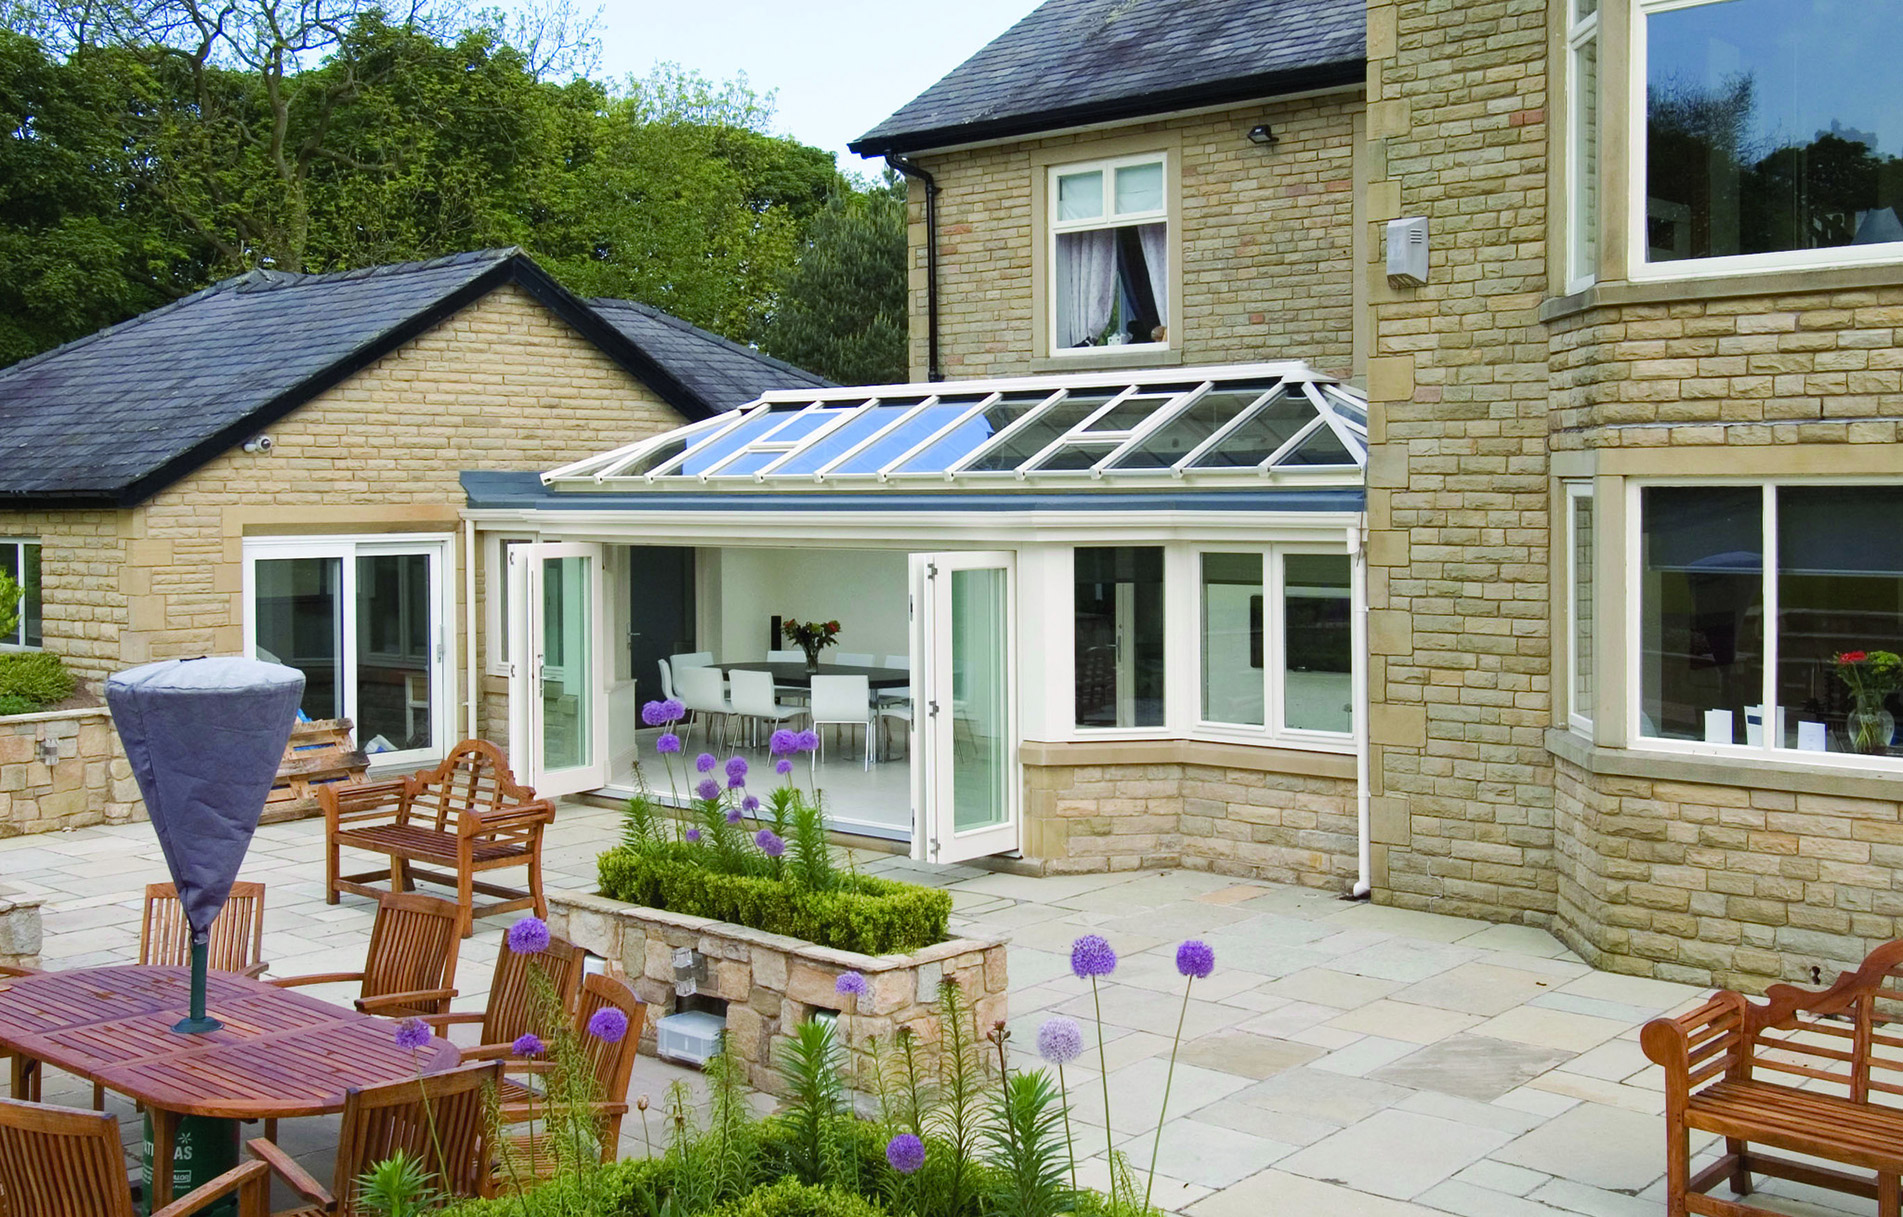 What Is an Orangery and Why Should You Choose One For Your Home?